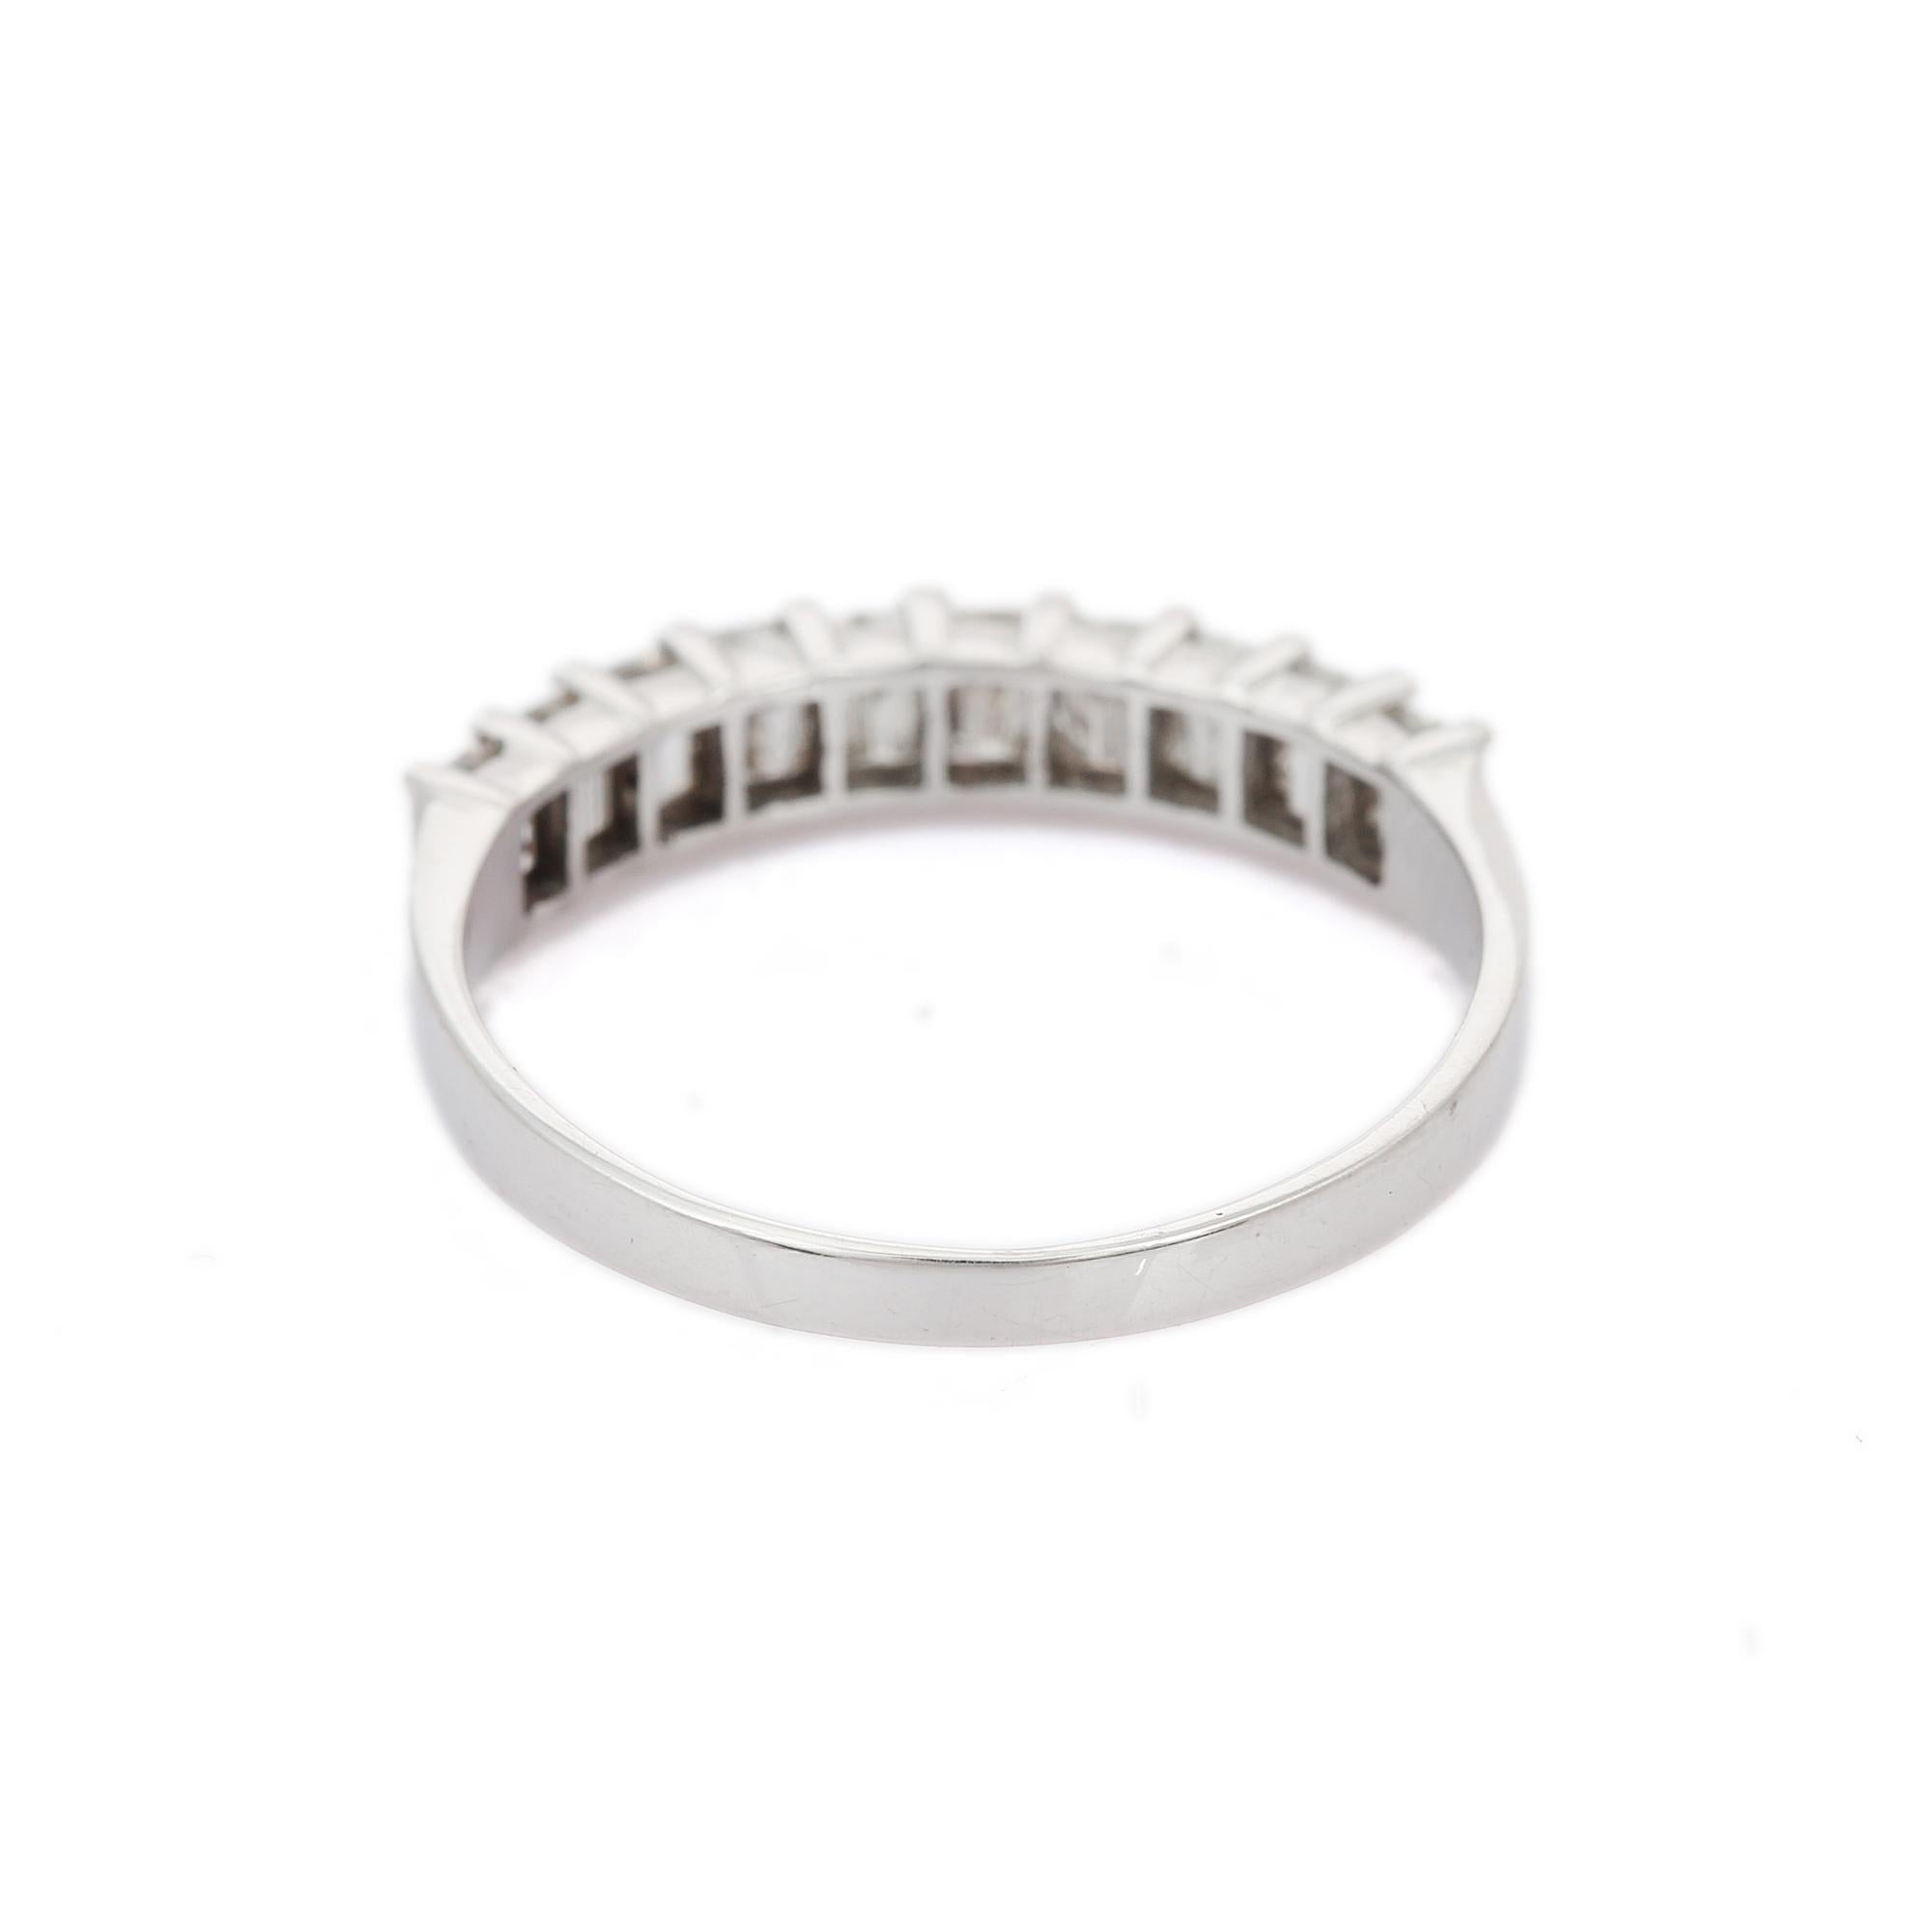 For Sale:  1.25 Carat Emerald Cut Diamond Half Eternity Band Ring in 18K White Gold  8